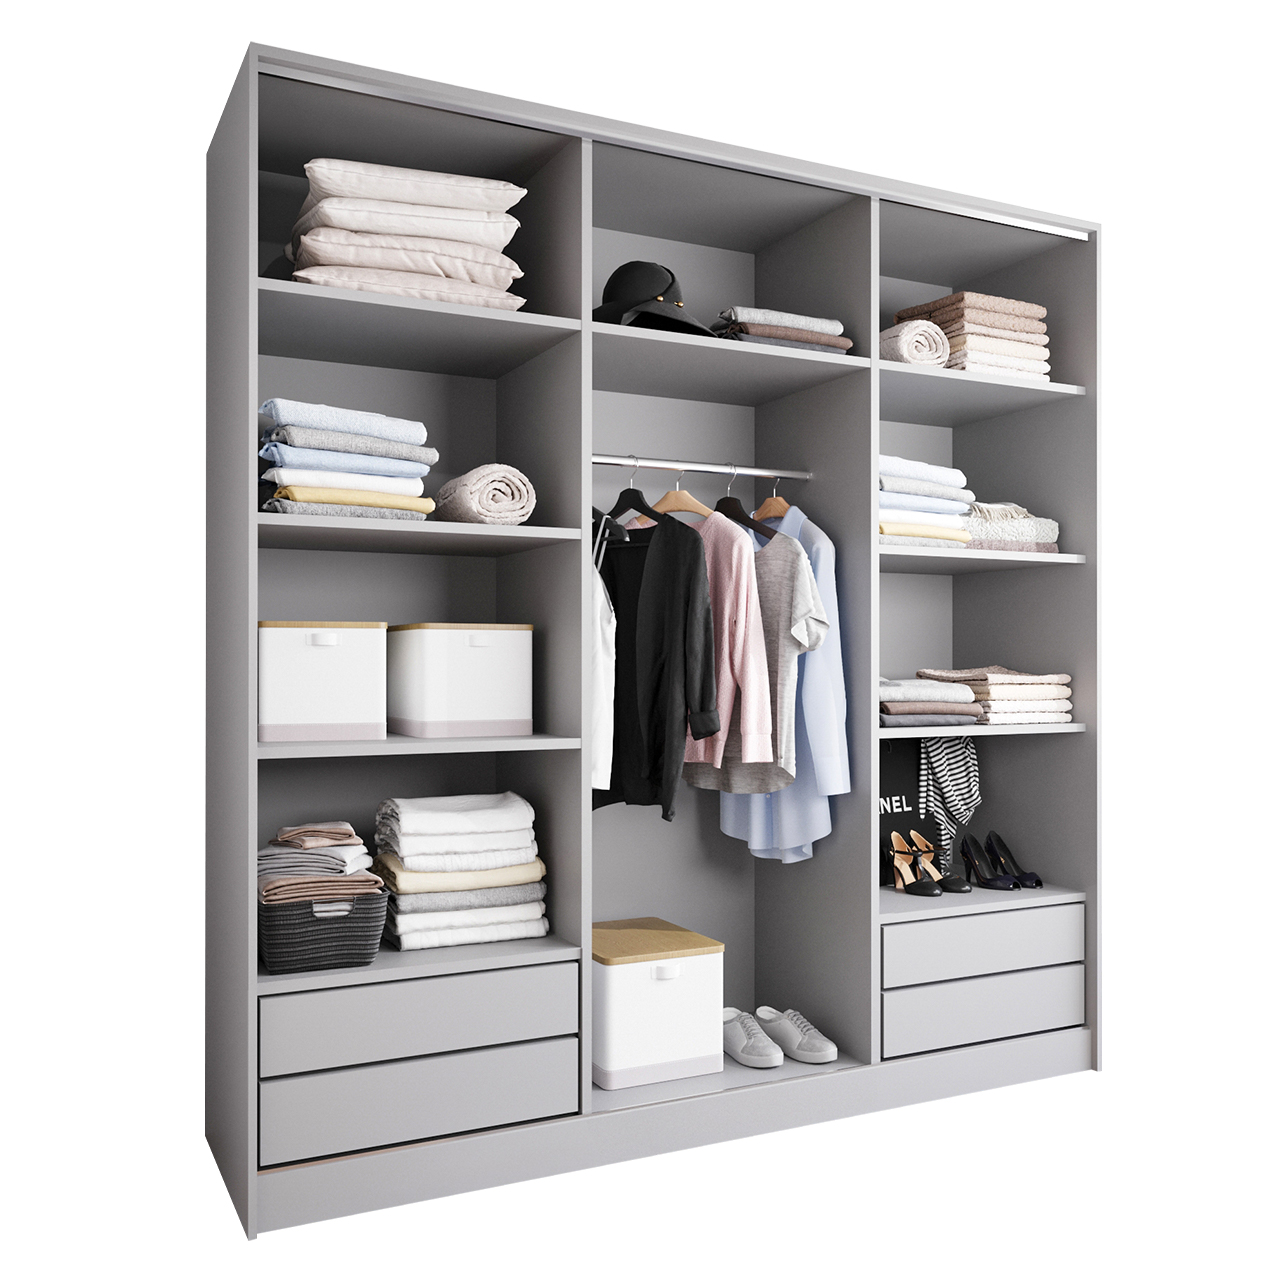 Sliding Wardrobe with Mirror and Drawers GRANO C 200 grey